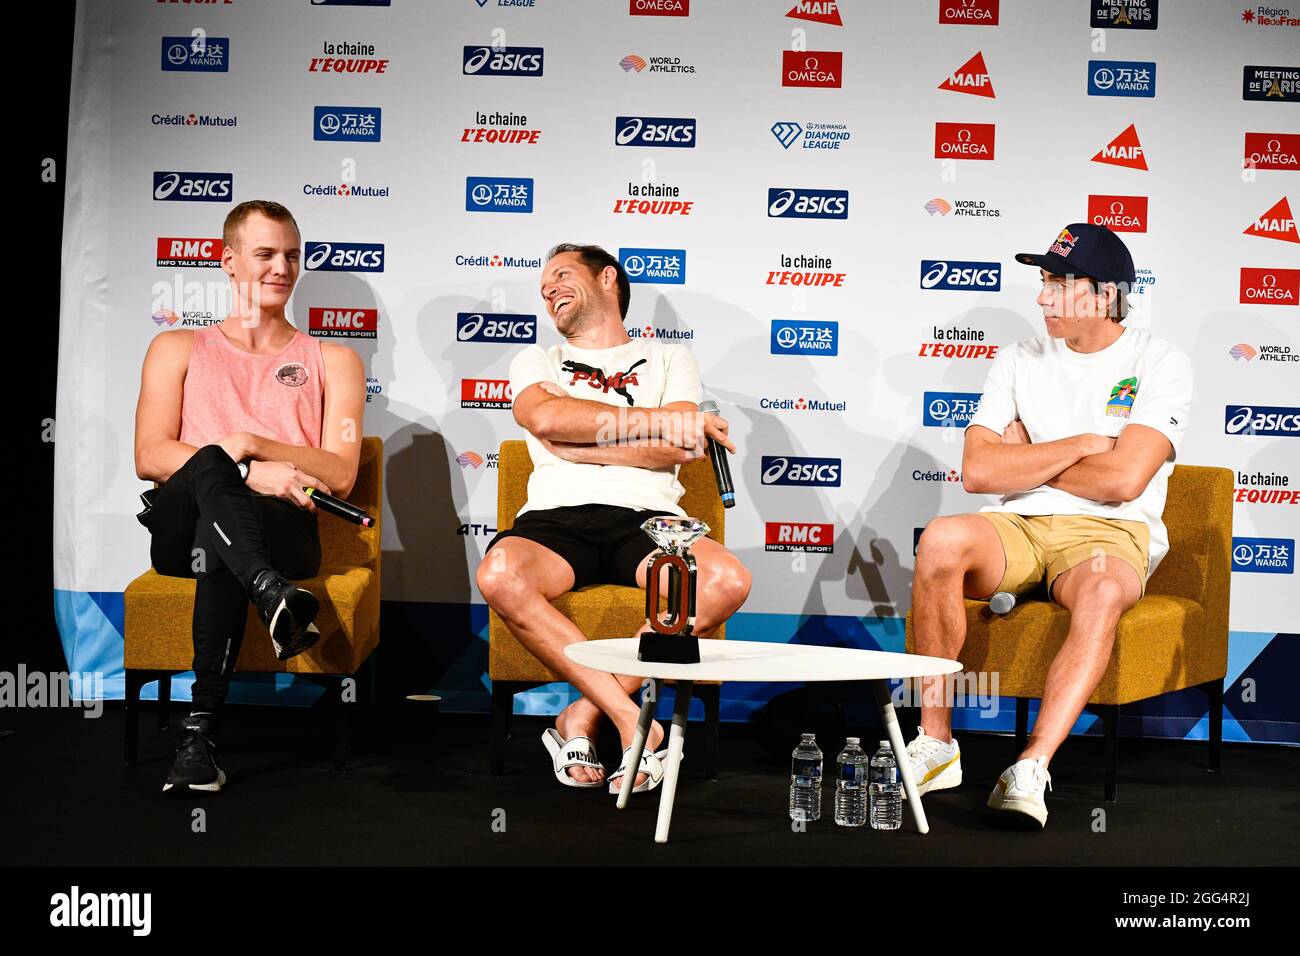 From left, Sam Kendricks (Men's Pole Vault) of United States of America  (USA), Renaud Lavillenie of France and Armand "Mondo" Duplantis of Sweden  attend the press conference prior to Meeting de Paris,